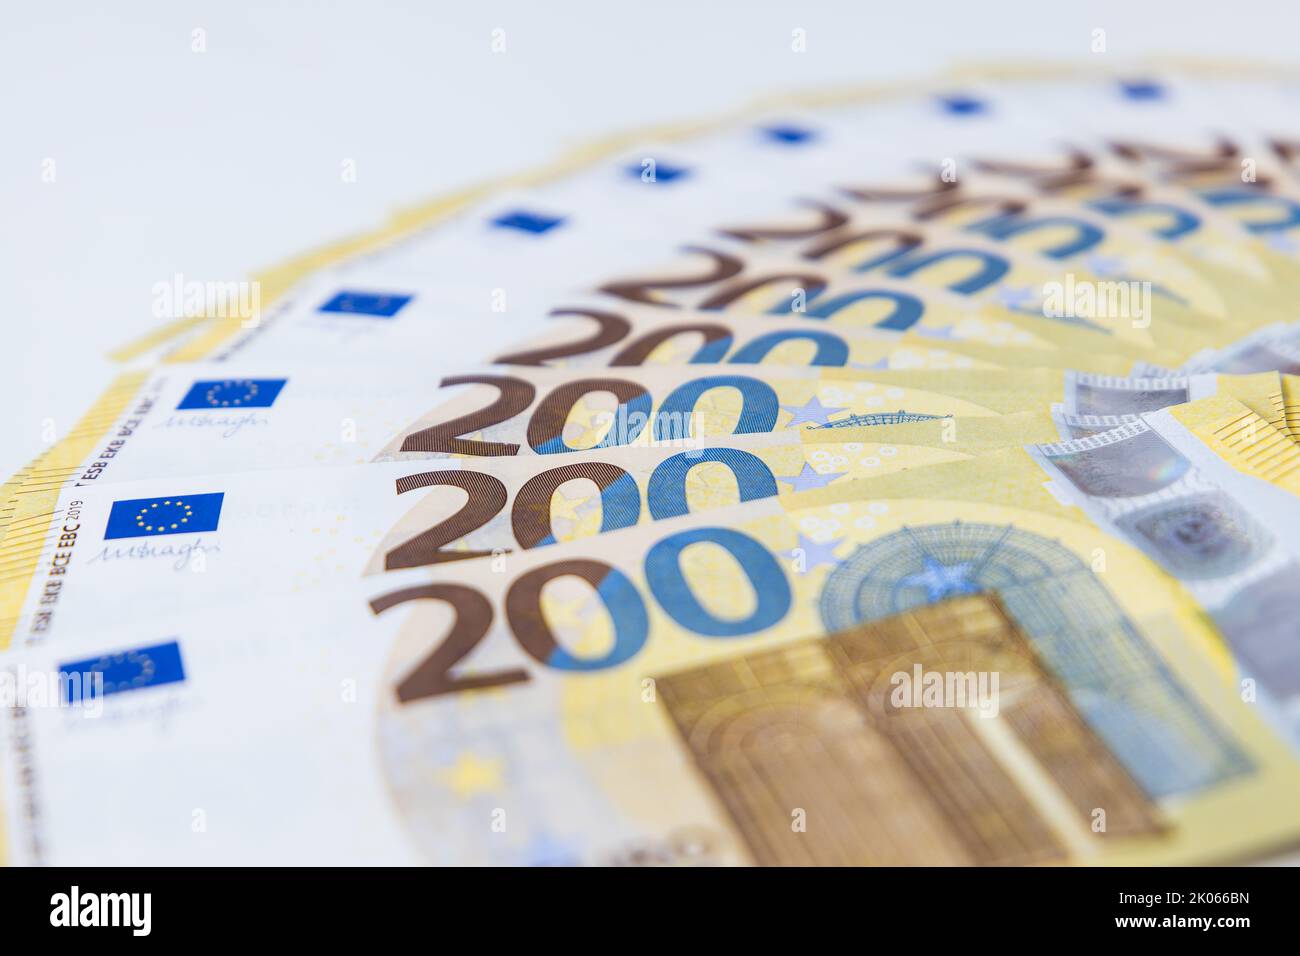 A load of 200 Euro banknotes in a pattern Stock Photo